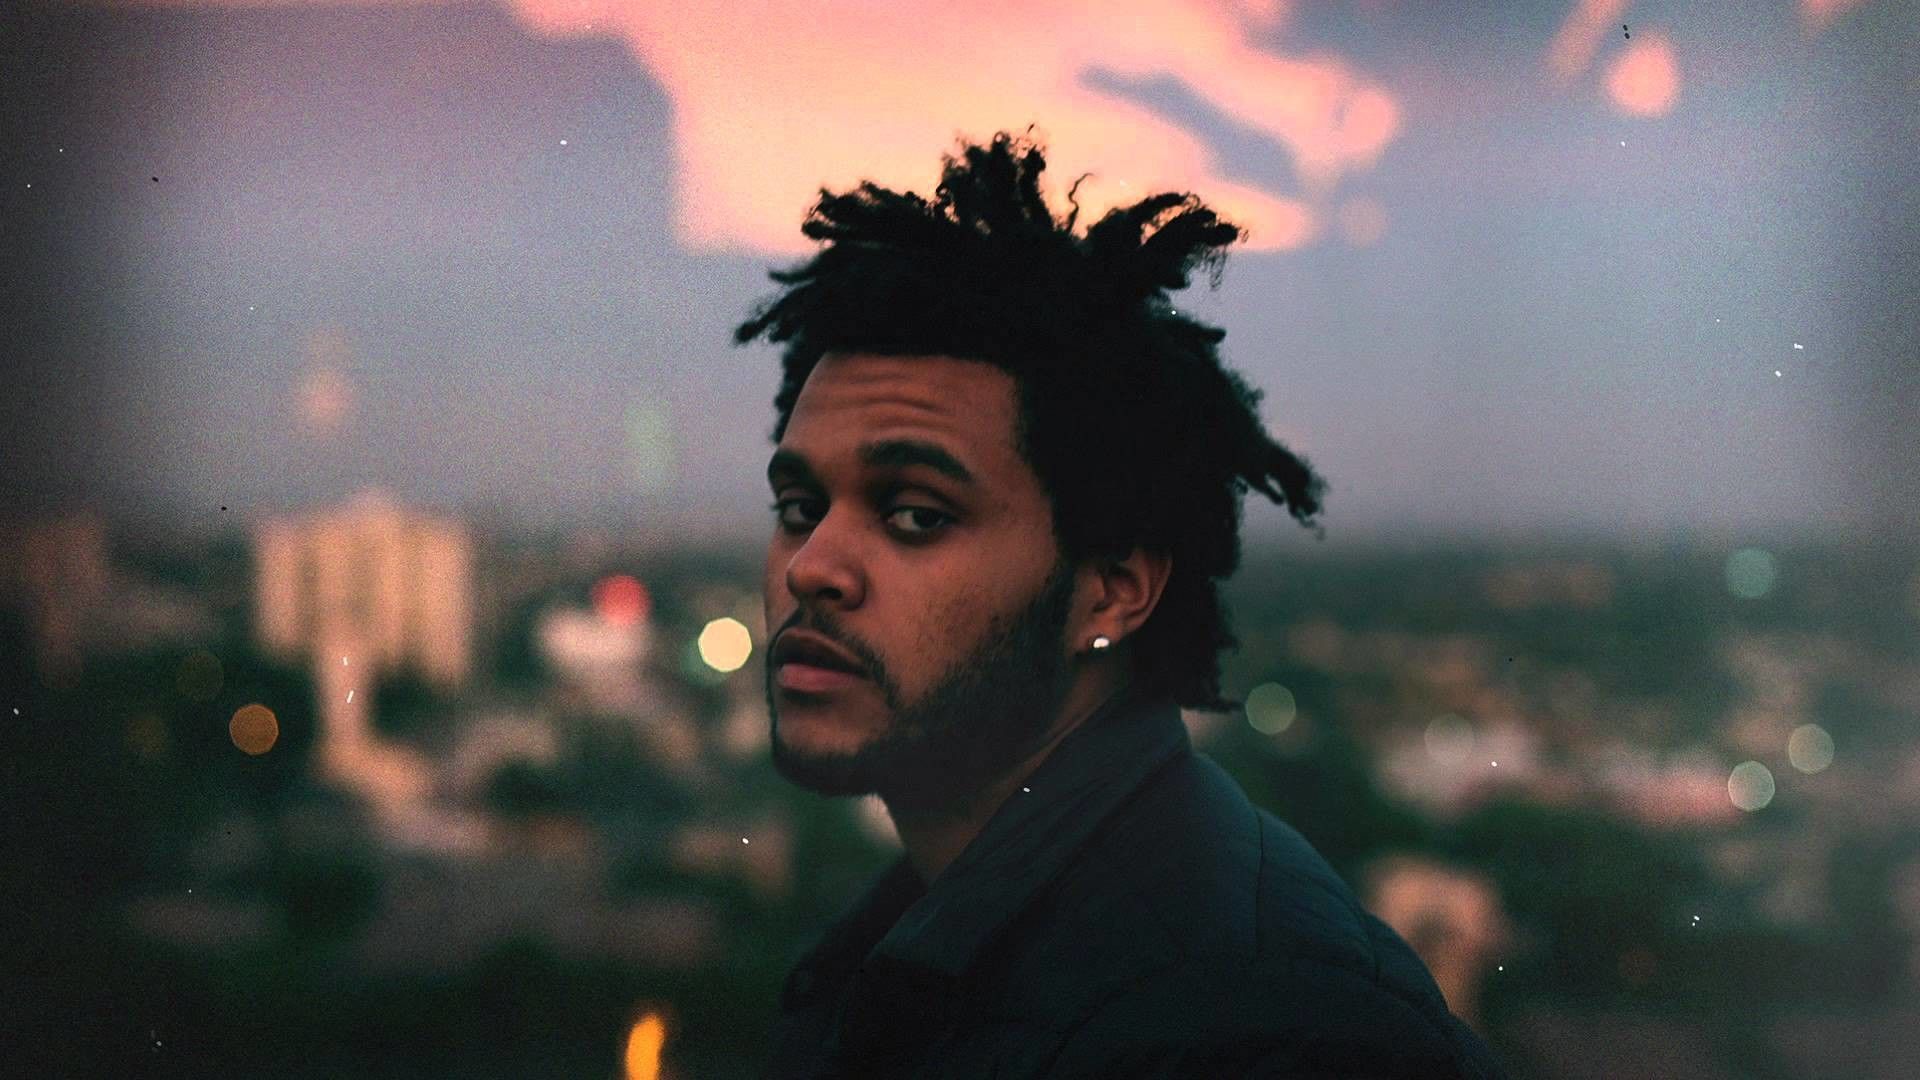 Wallpaper ID 153444  The Weeknd XO simple background free download